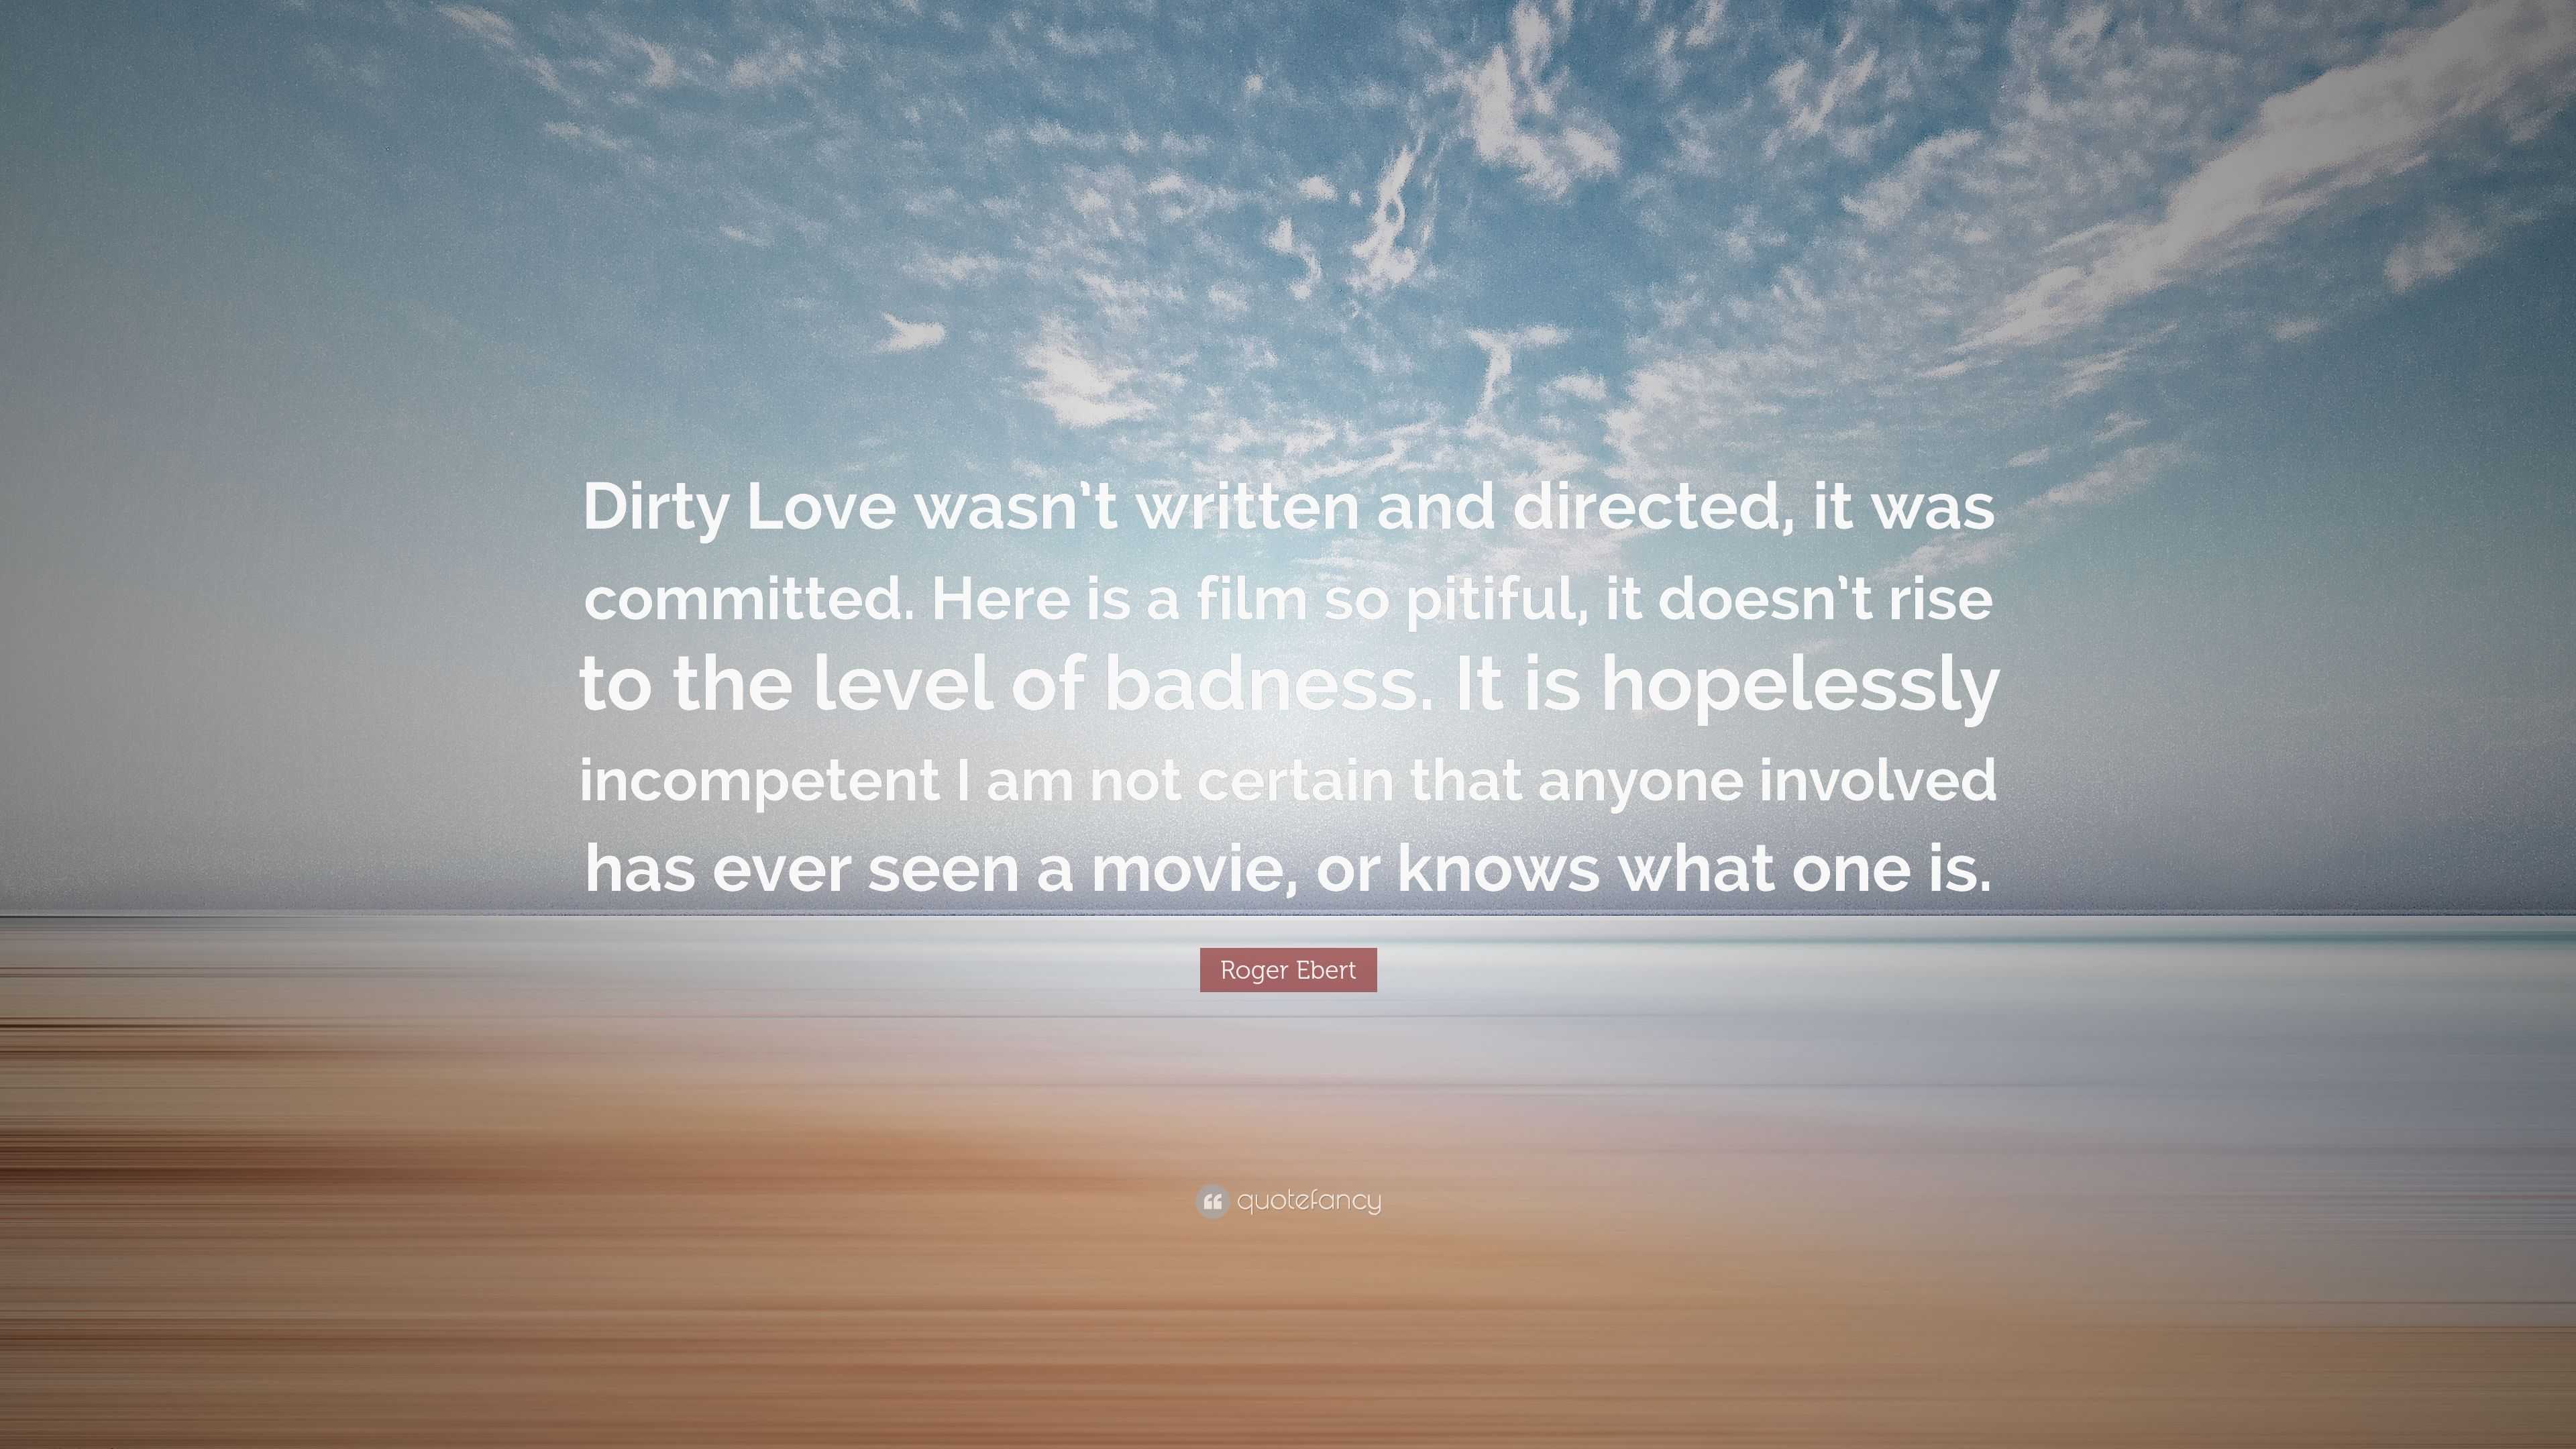 Roger Ebert Quote “Dirty Love wasn t written and directed it was